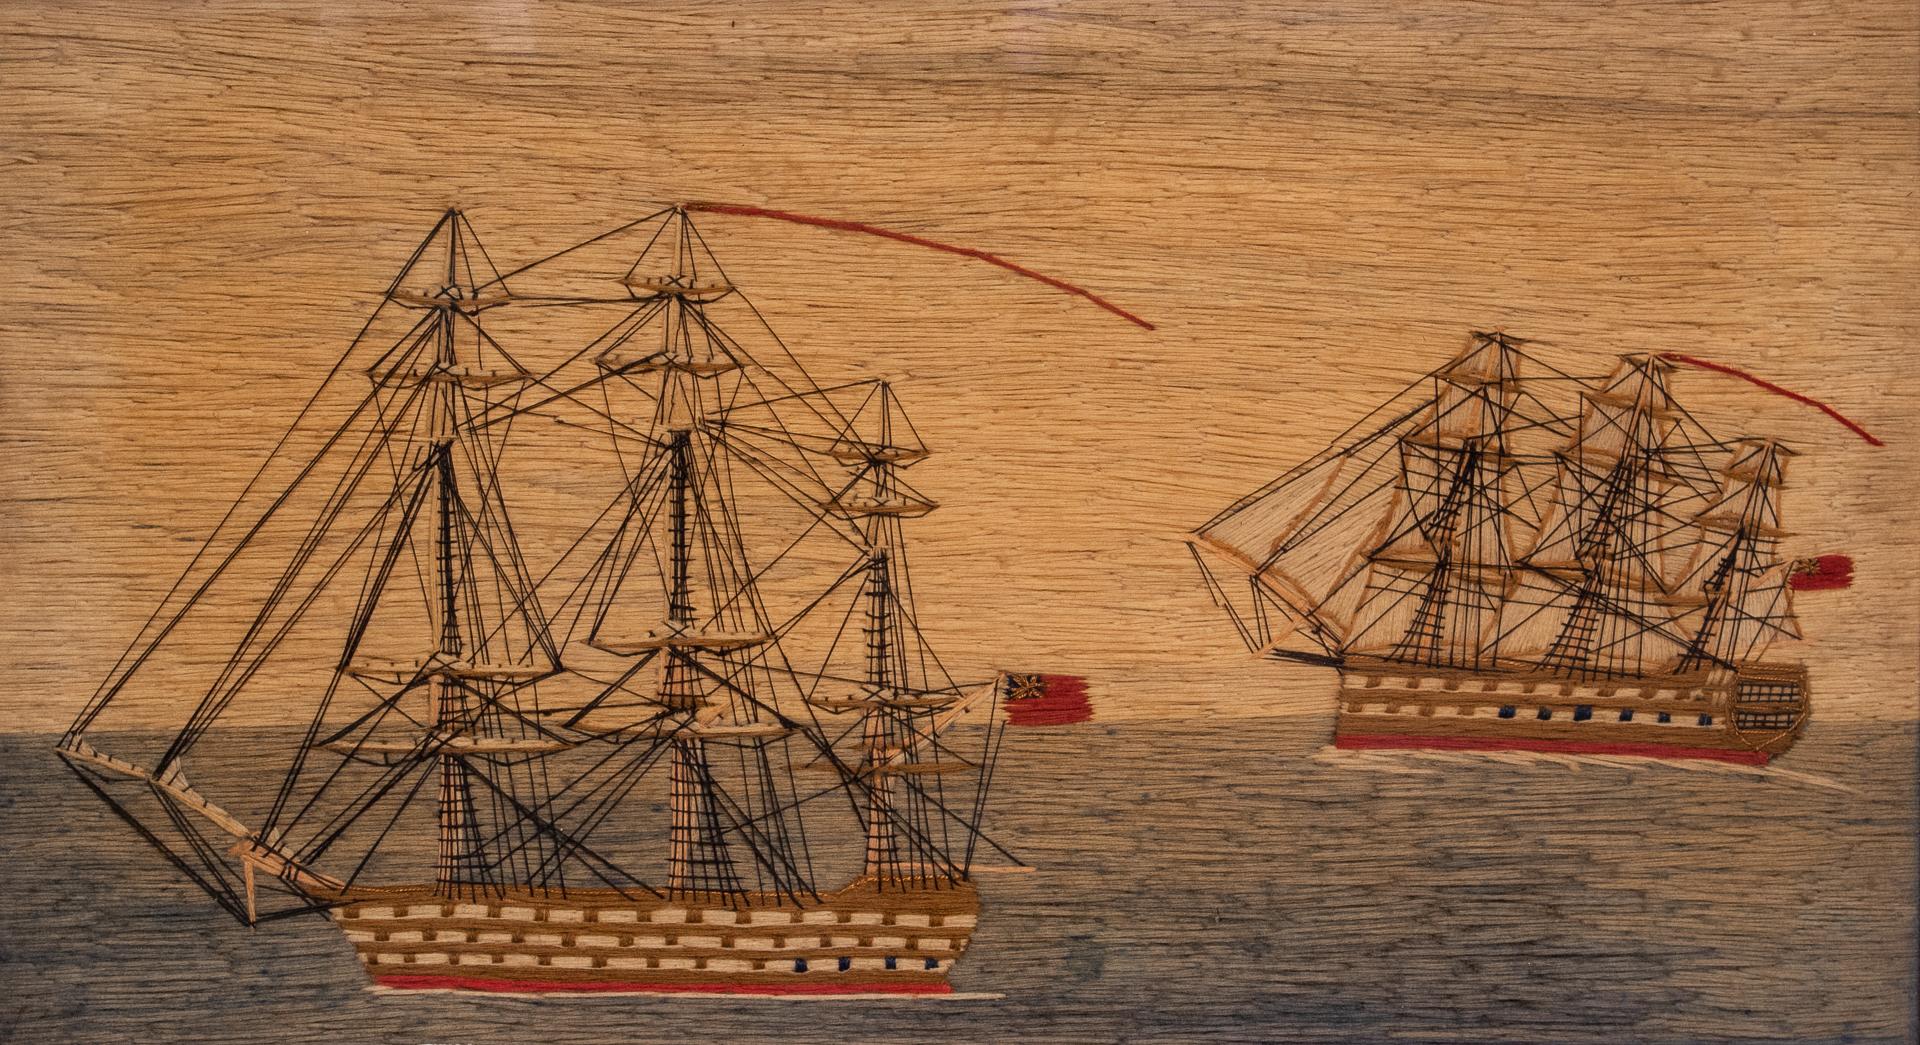 Sailors Woolwork of Two Full Rigged Ships - Folk Art Art by Unknown